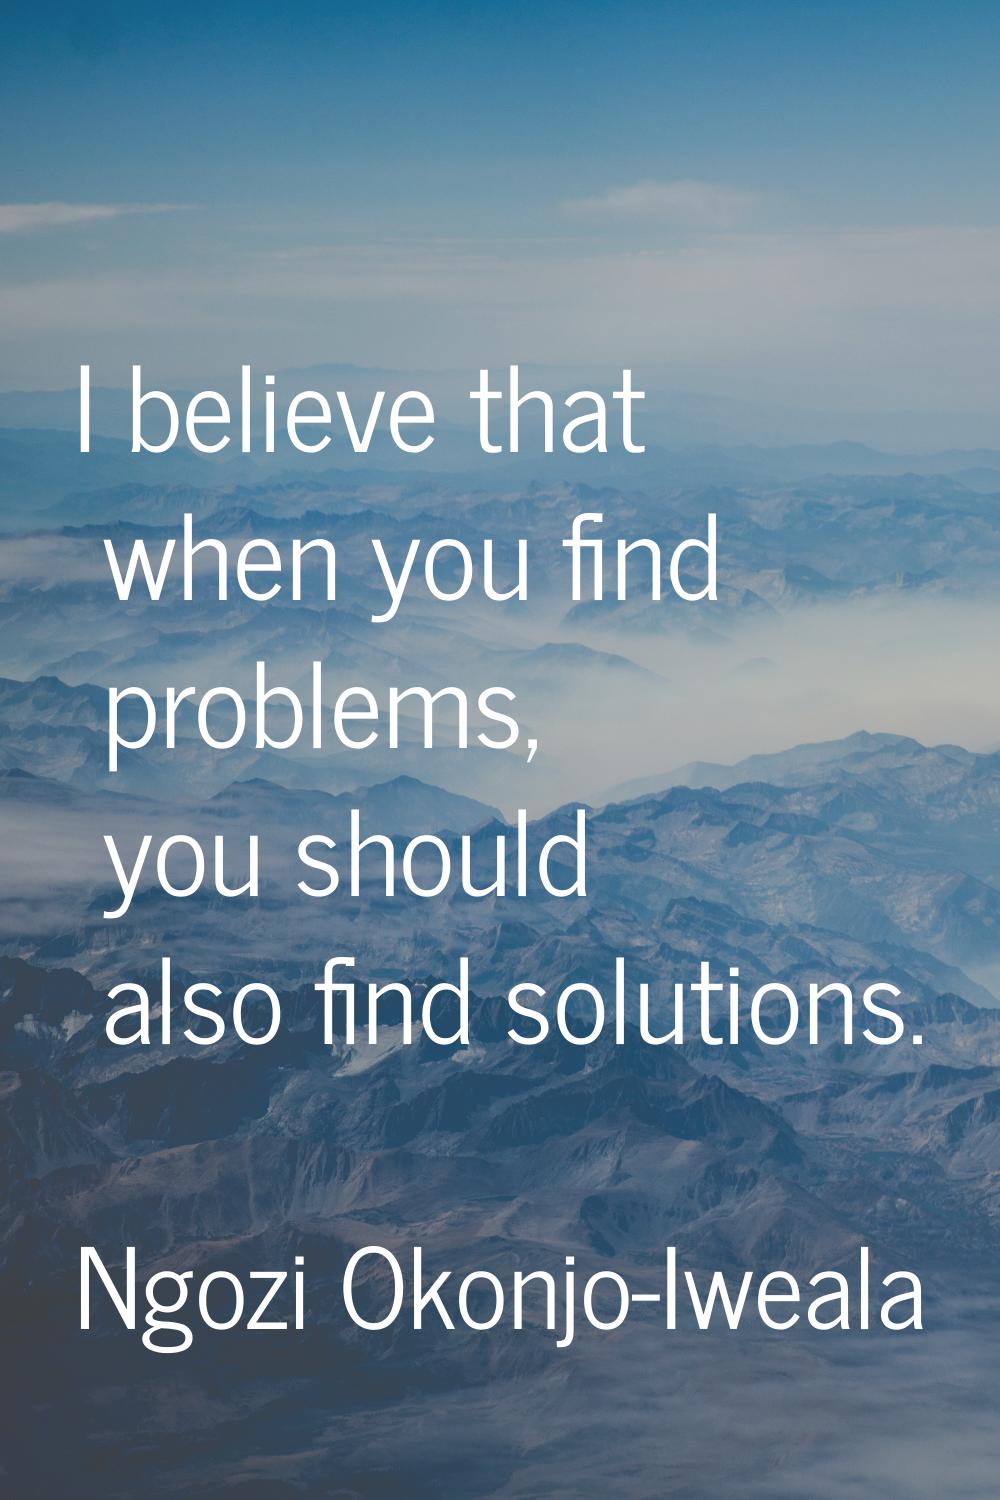 I believe that when you find problems, you should also find solutions.